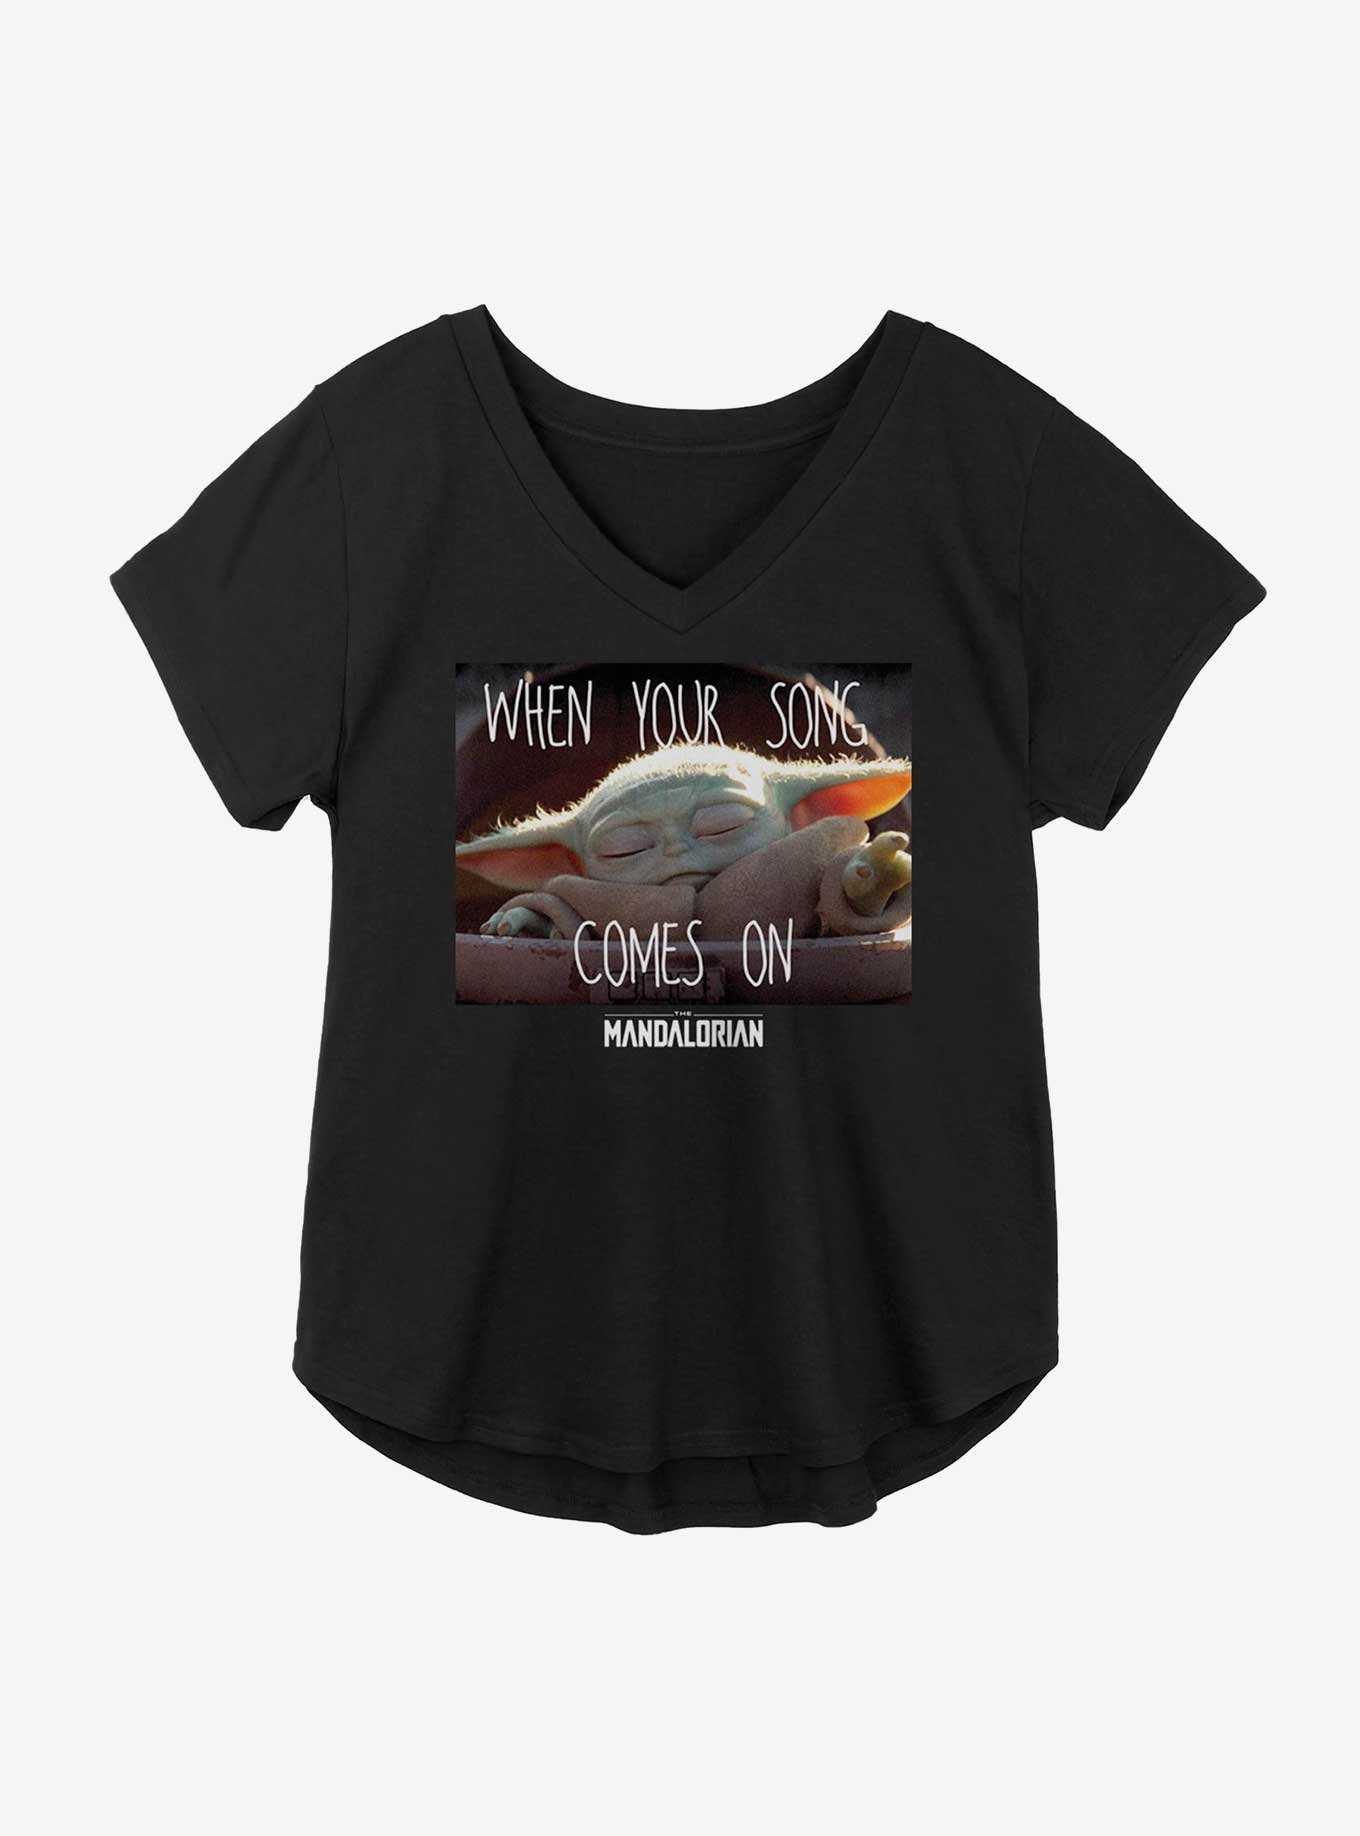 Star Wars The Mandalorian When Your Song Comes On Meme Girls Plus Size T-Shirt, , hi-res